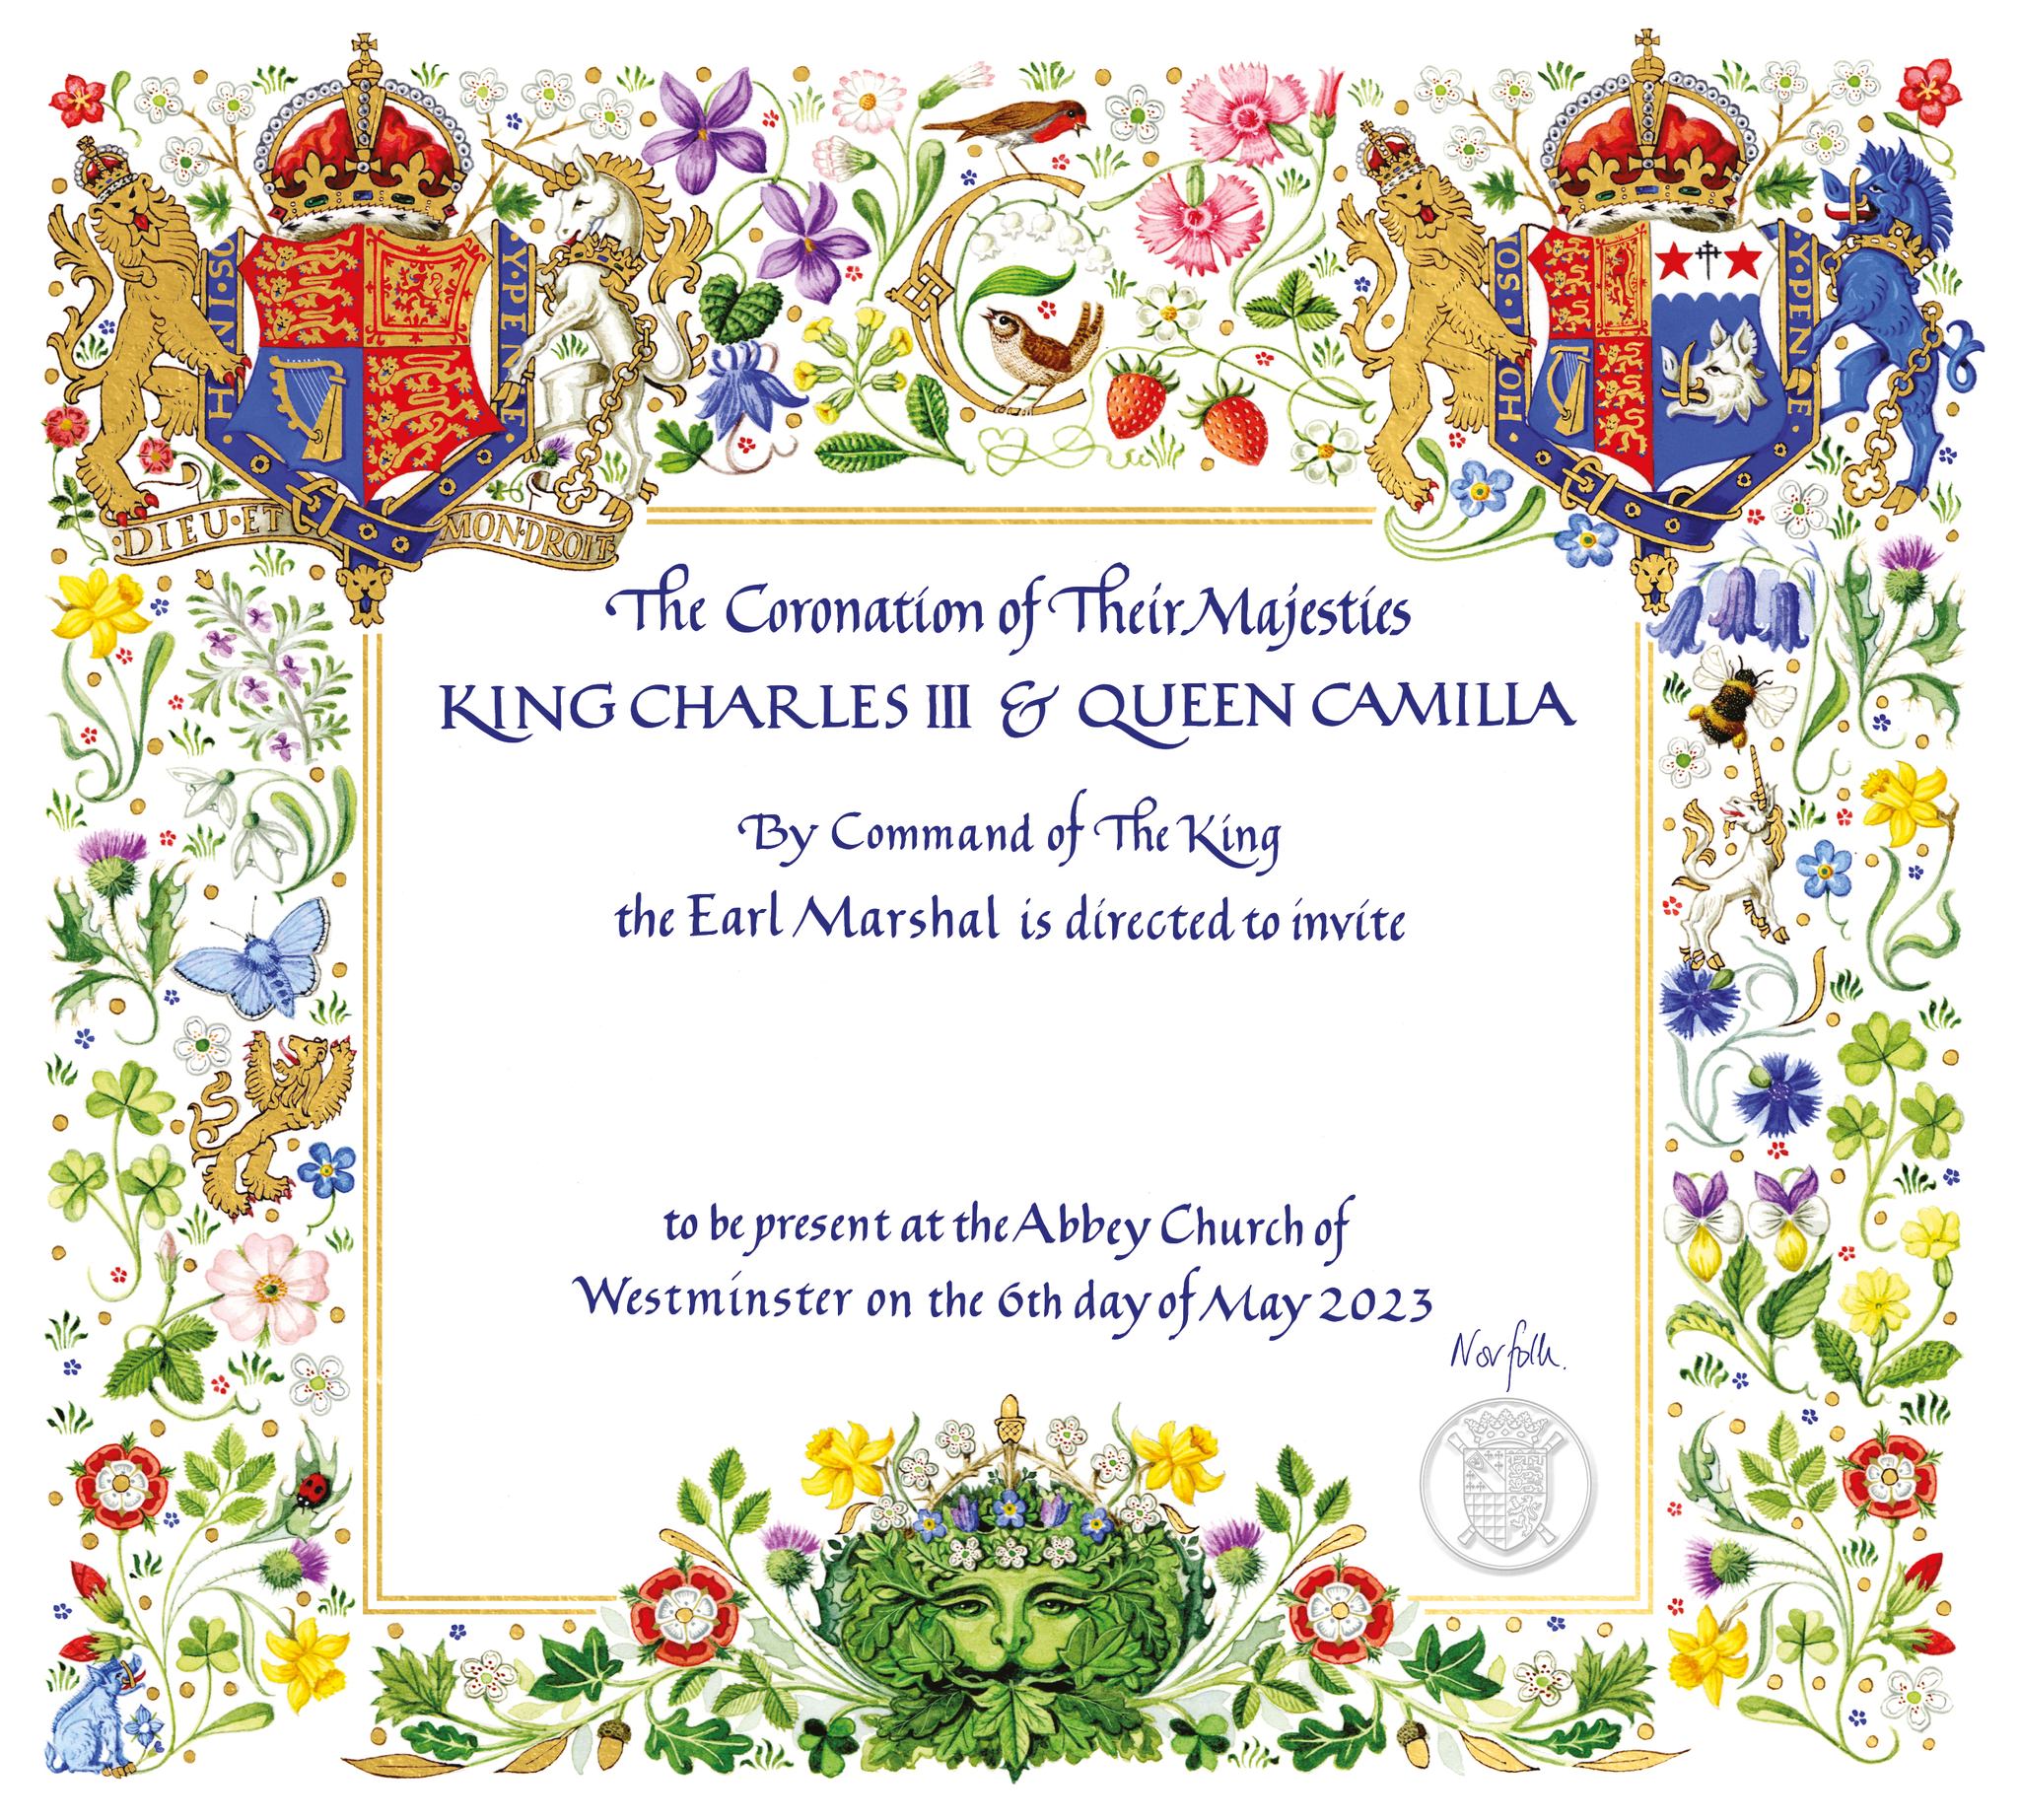 The official invitation for the Coronation of The King and The Queen Consort